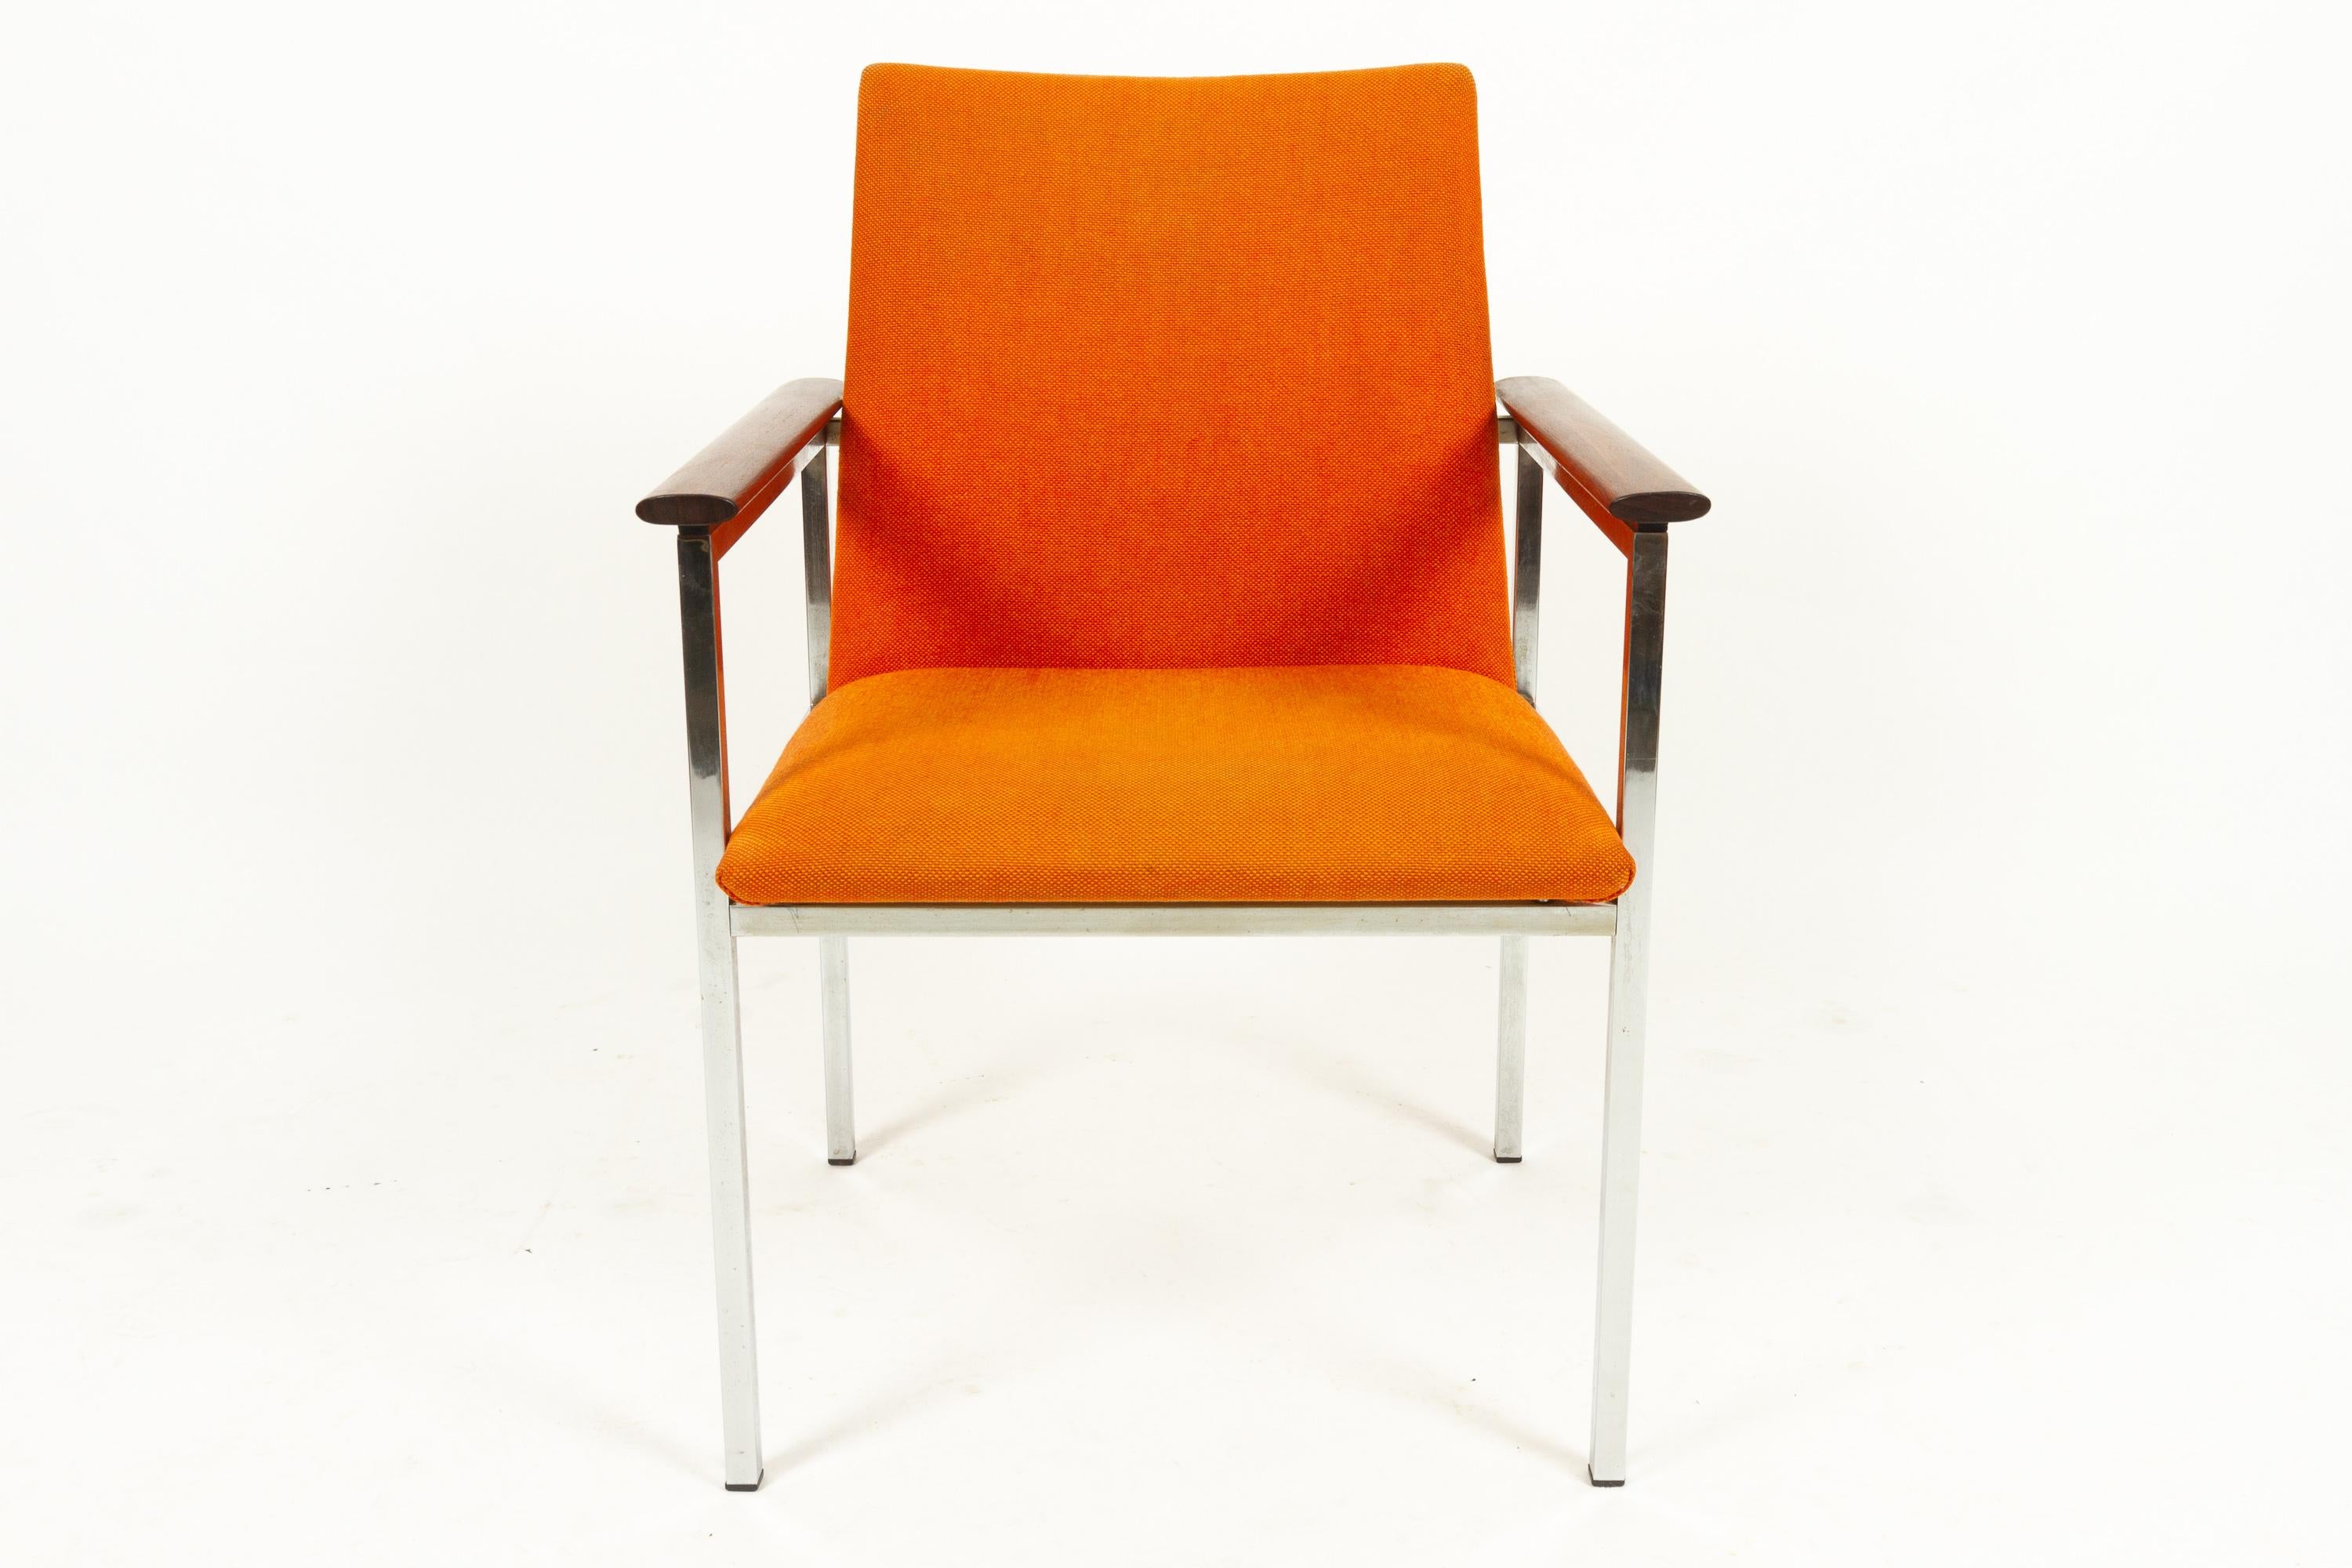 Danish armchair with teak armrests by Sigvard Bernadotte for France & Søn, 1960s.
Stylish Mid-Century Modern armchair with chrome frame and teak armrests. Seat upholstered in original orange wool.
Very comfortable and dazzling.
Sigvard Bernadotte